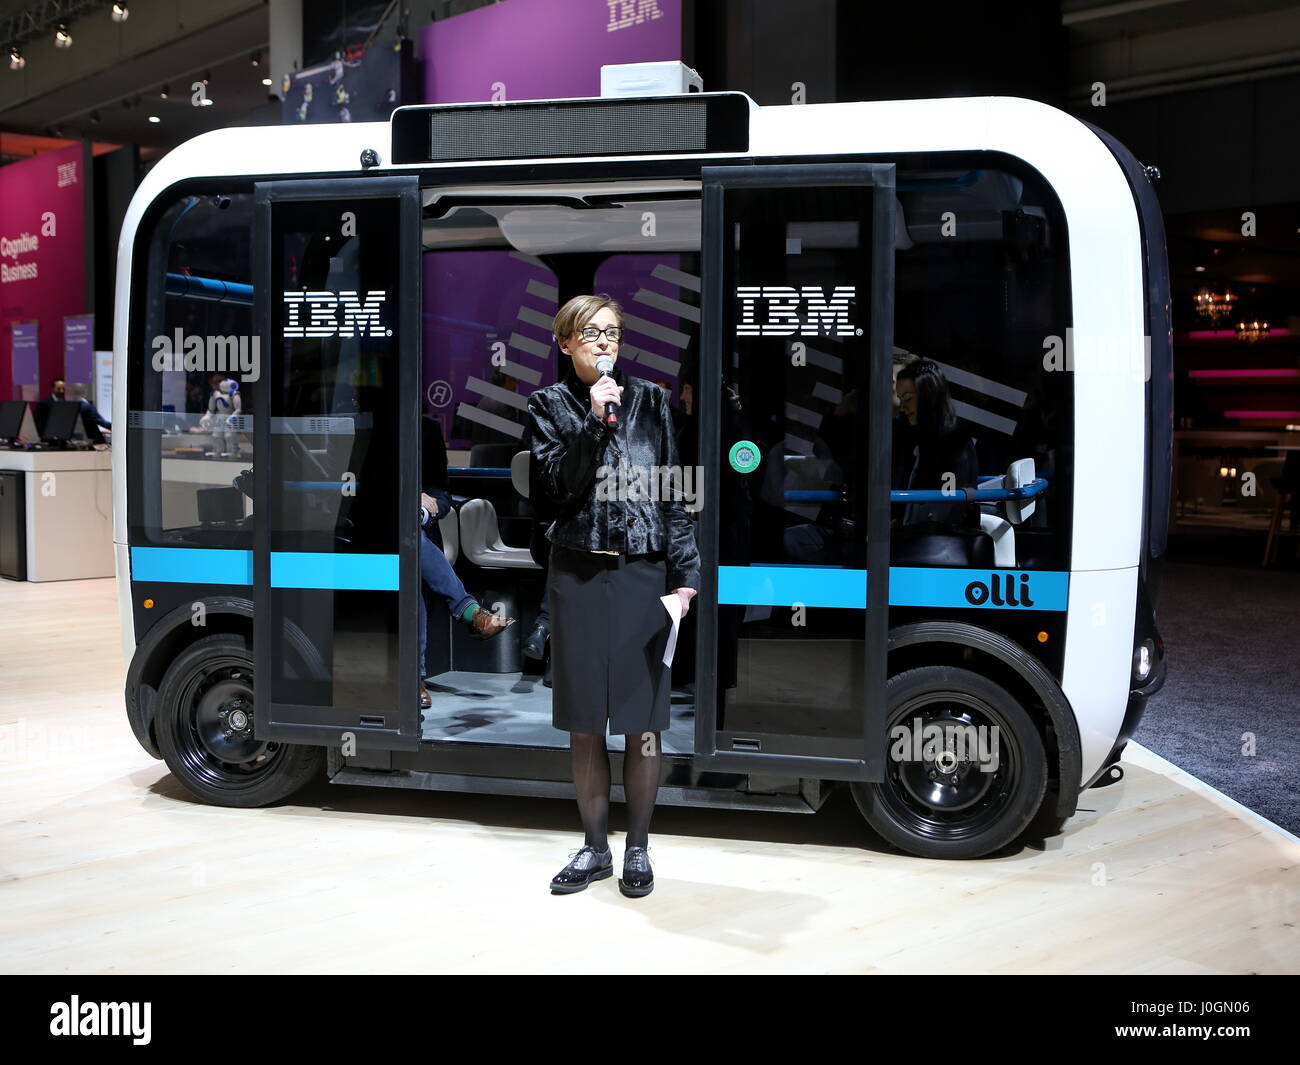 Hanover, Germany. 19th March, 2017. Presentation of self-driving electric minibus 'Olli', developed by Local Motors in cooperation with IBM. IBM-System Watson IoT (Internet of Things) controls the autonomous driving. CeBIT 2017, ICT trade fair, lead theme 'd!conomy - no limits'. Photocredit: Christian Lademann Stock Photo